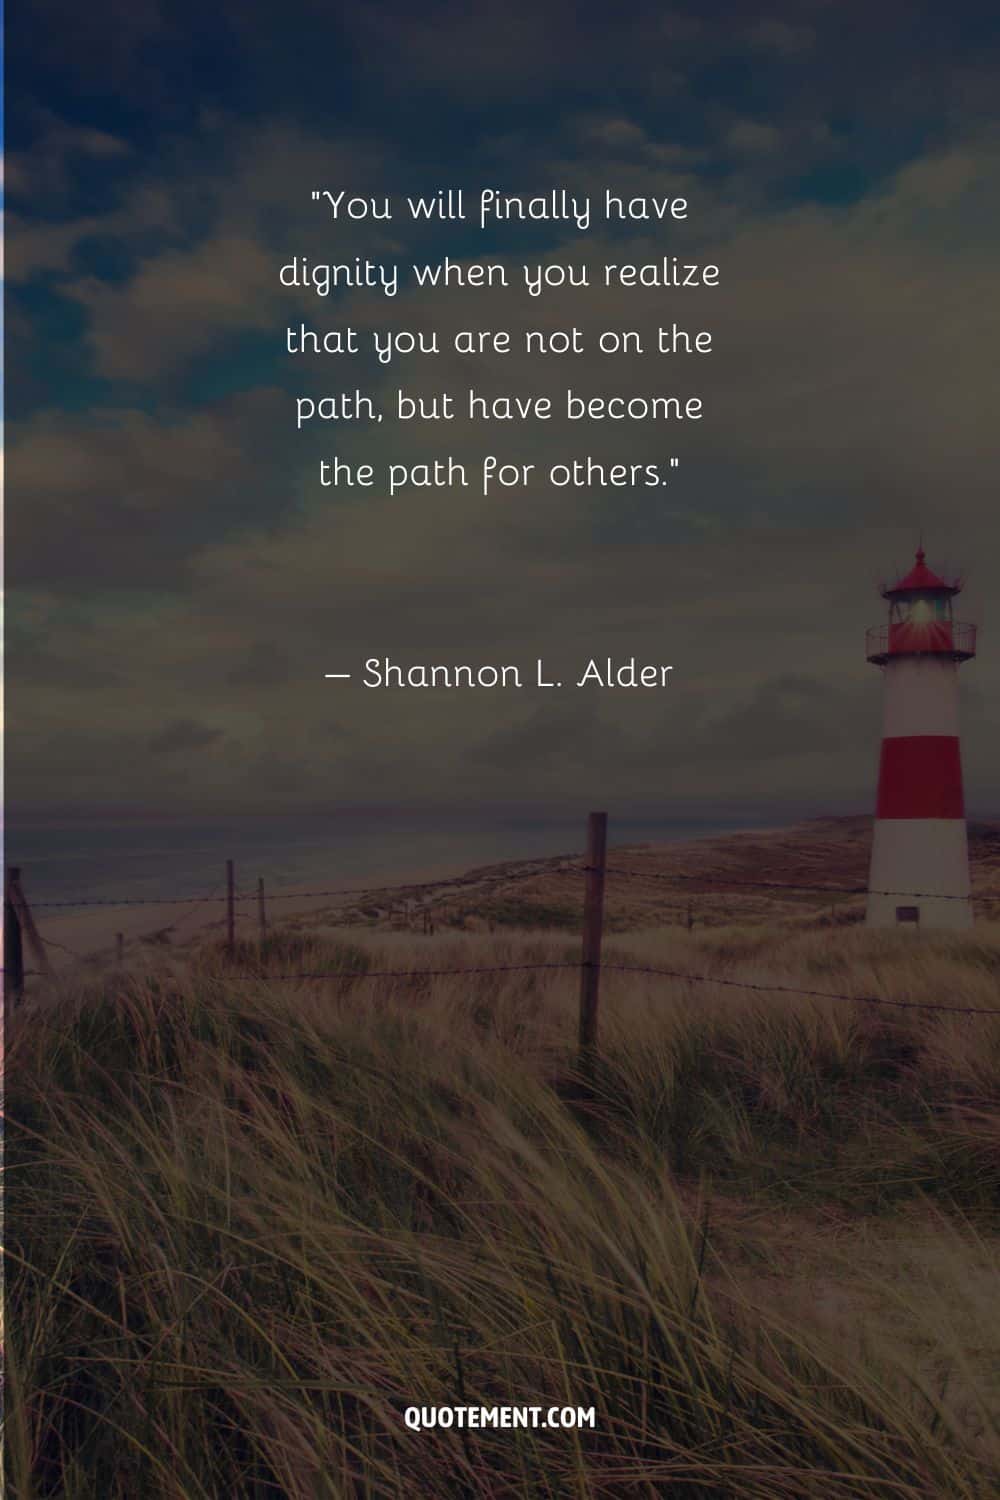 Motivational quote by Shannon L. Alder and a lighthouse in the background